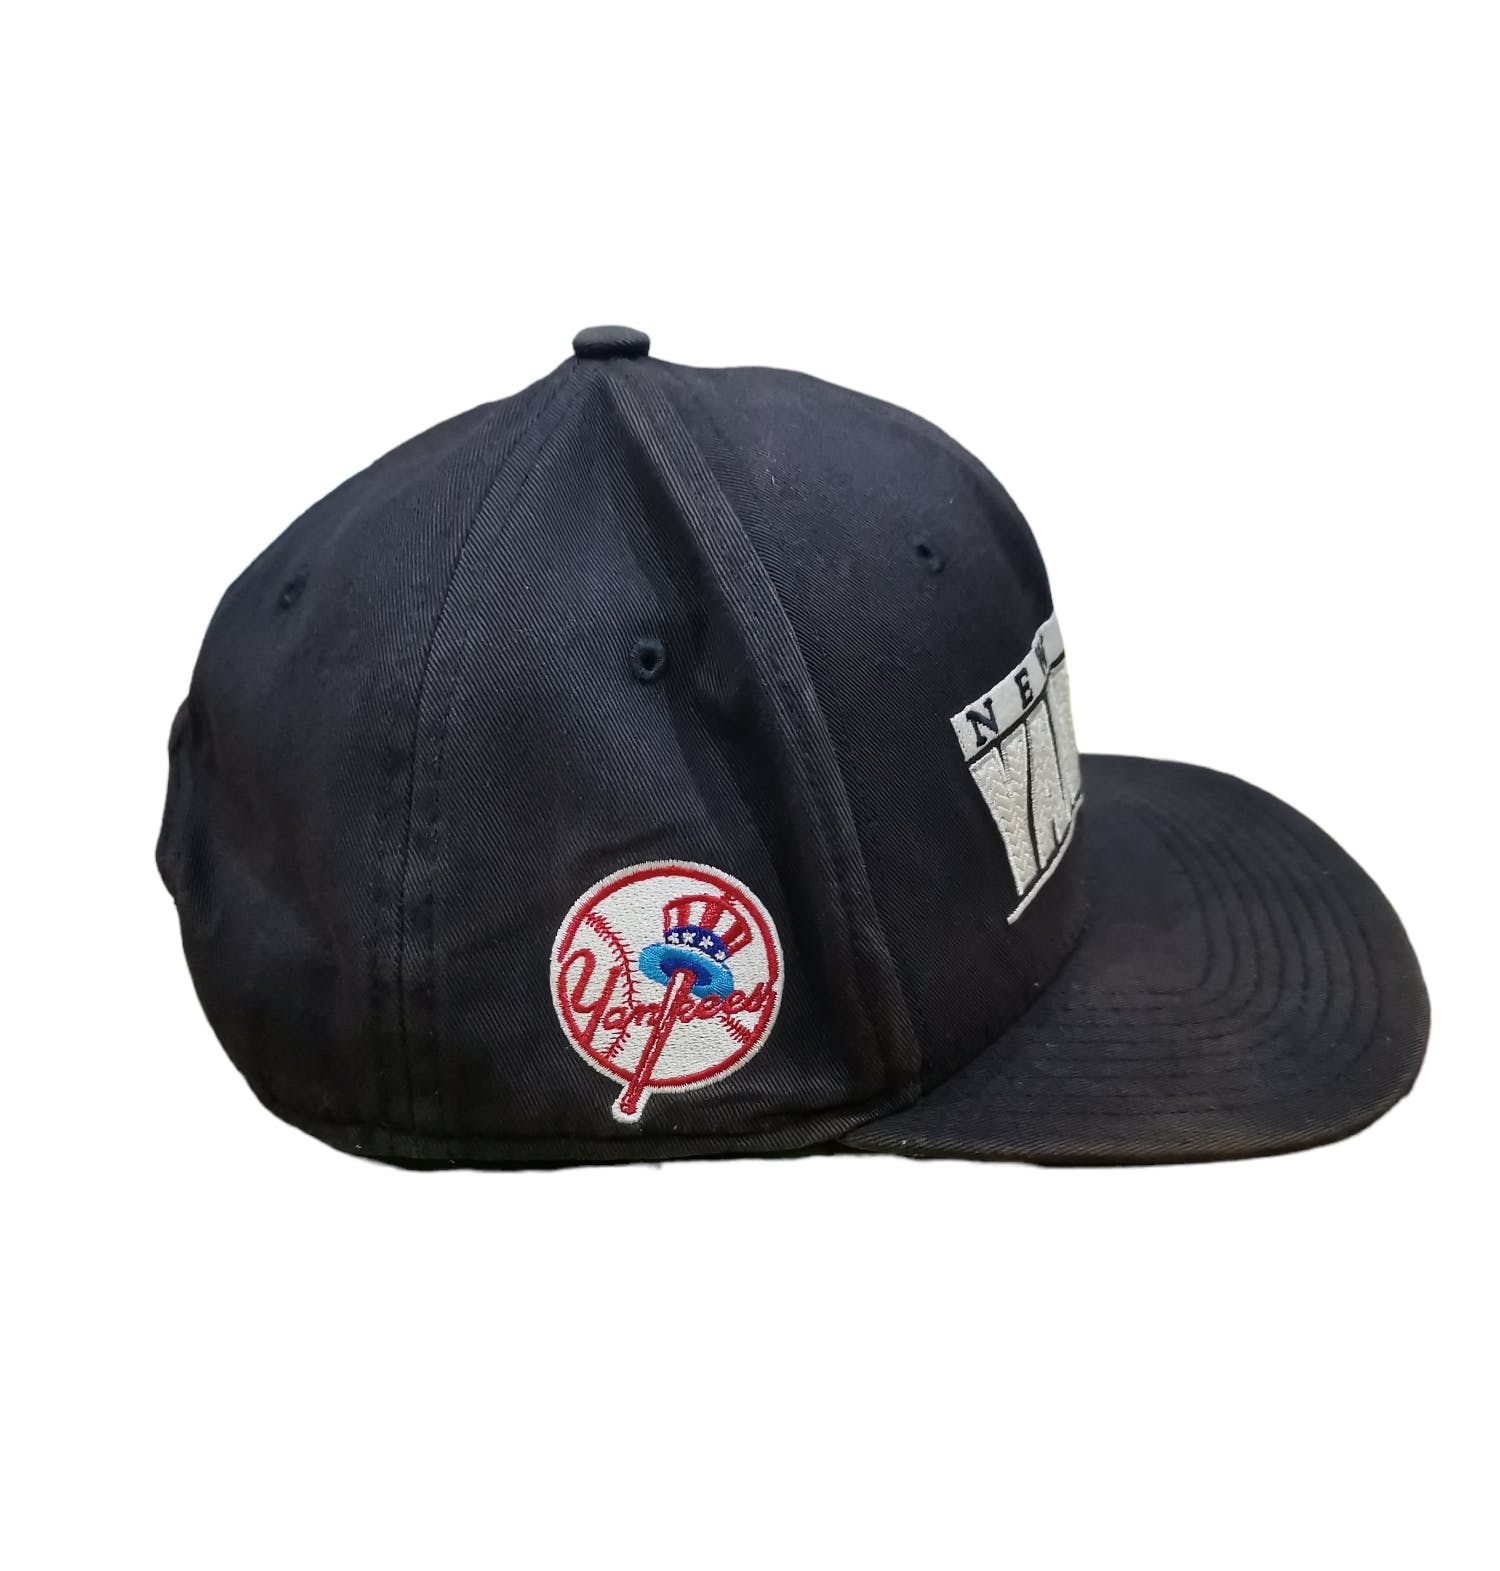 Vintage New York Yankees Hat x Team Nike Sports Embroidery - 2